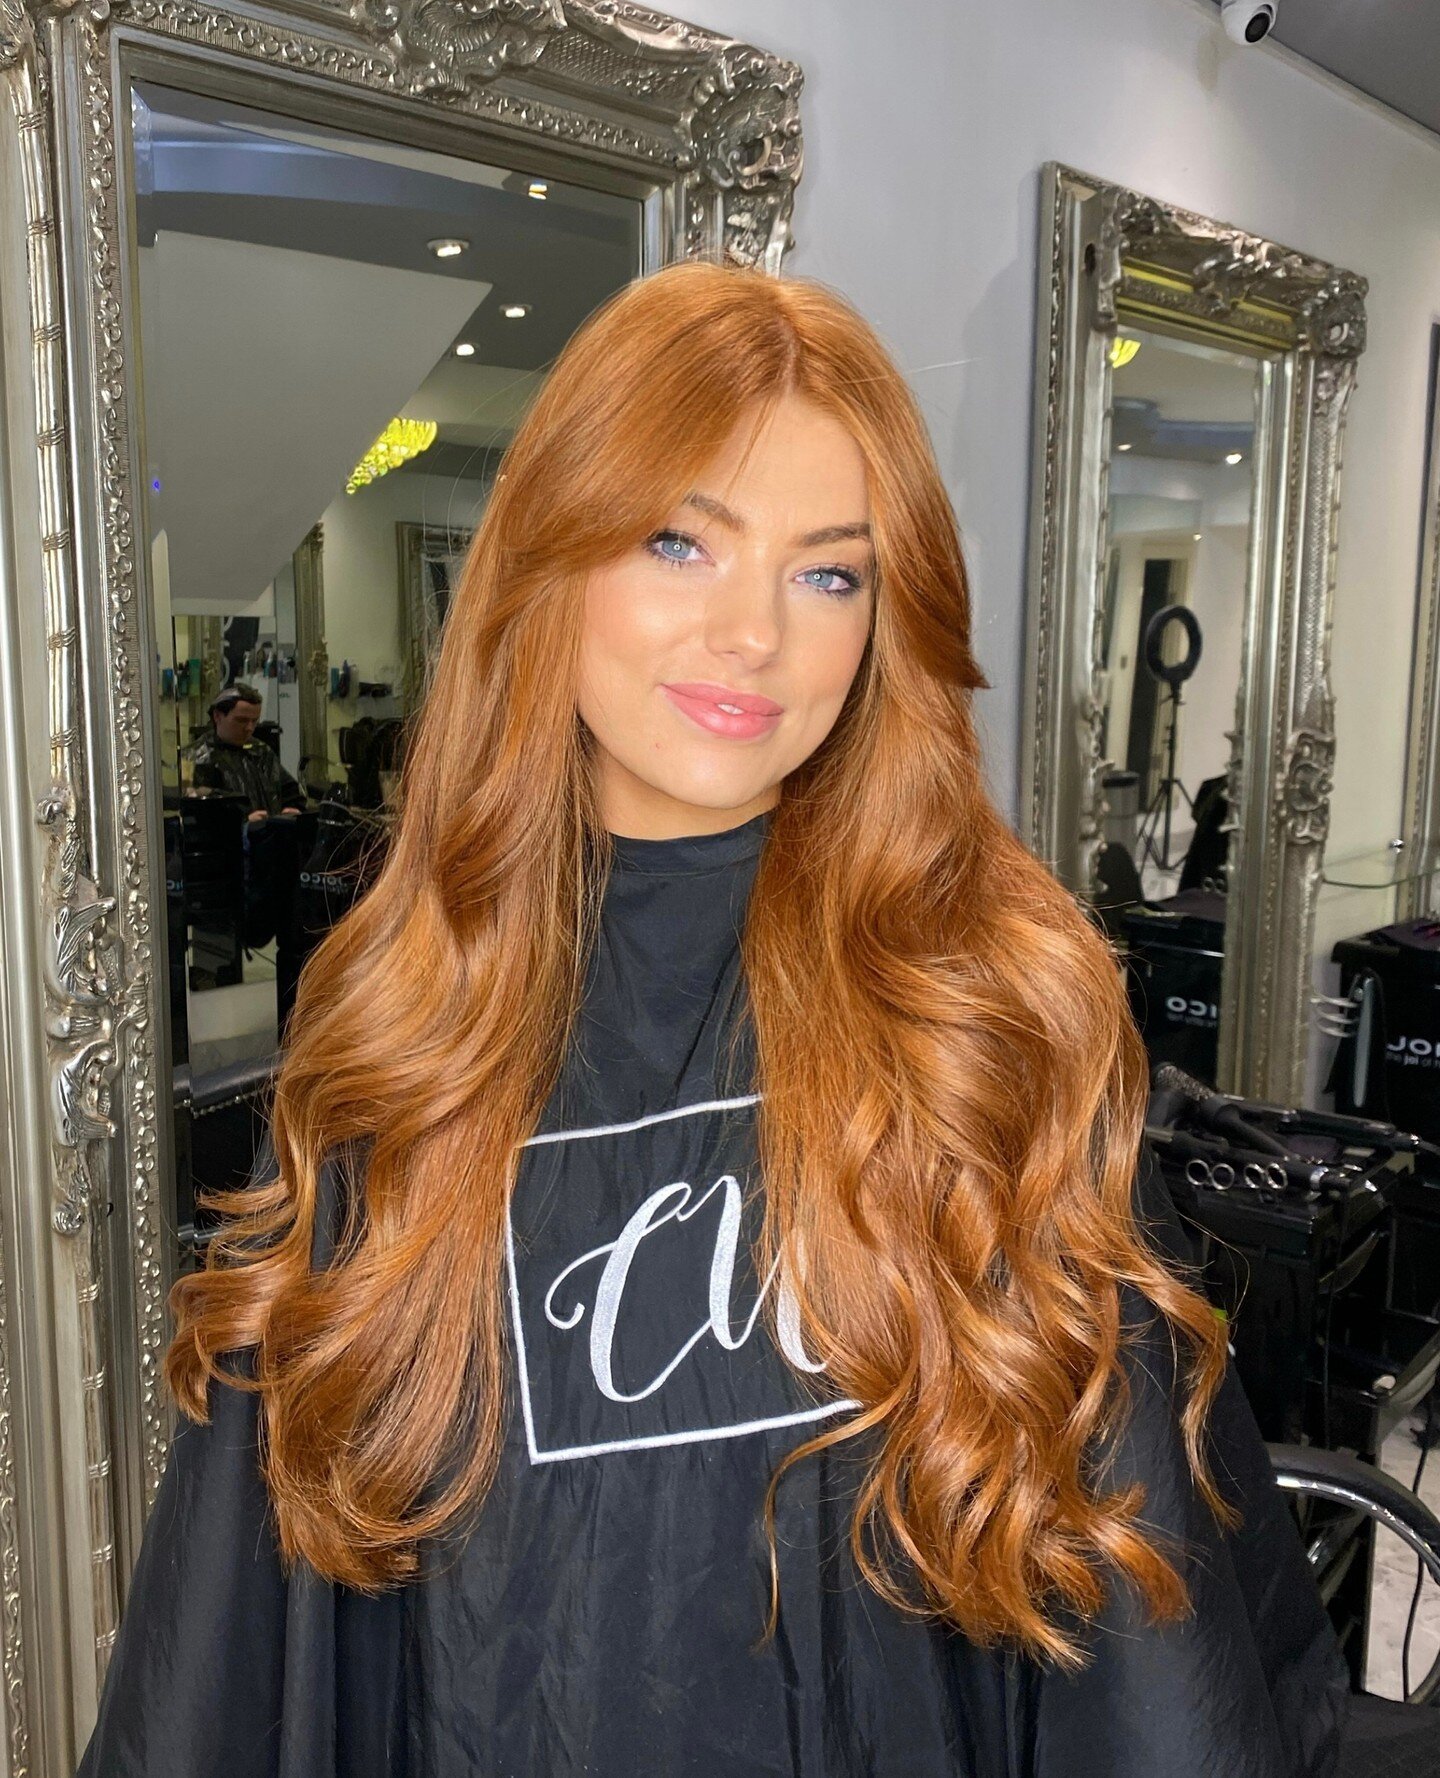 Cut &amp; Blowdry by Carmen⁠ 🦋

Maintenance is they key to keeping your hair at the peak of it&rsquo;s health! Regular trims alongside the right products will allow your hair to remain sleek and glossy with minimal maintenance. 

⁠
For pricing &amp;